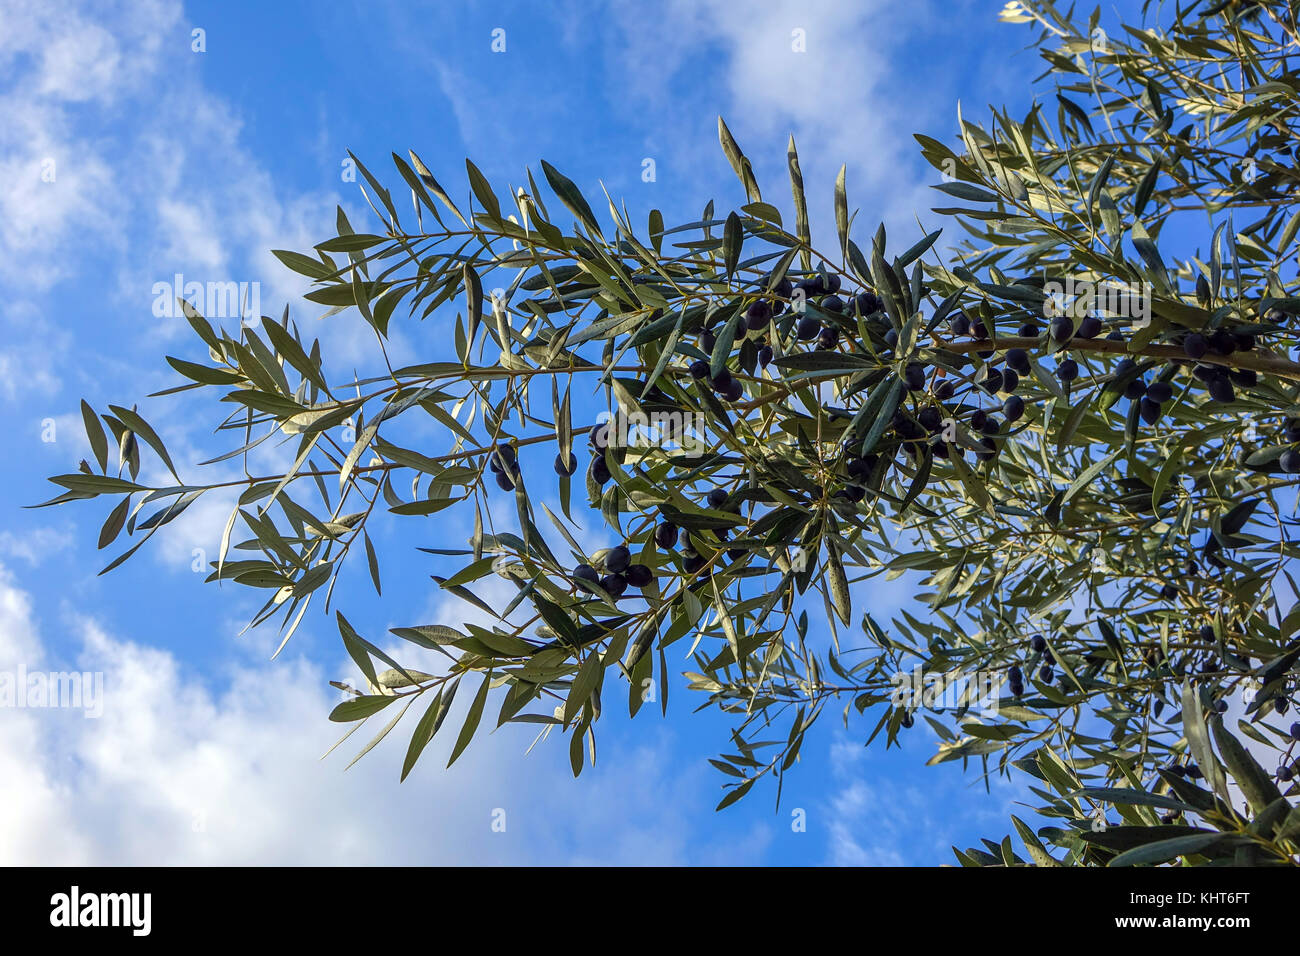 Olive branches and black olives against blue sky, Kalymnos, Greece Stock Photo